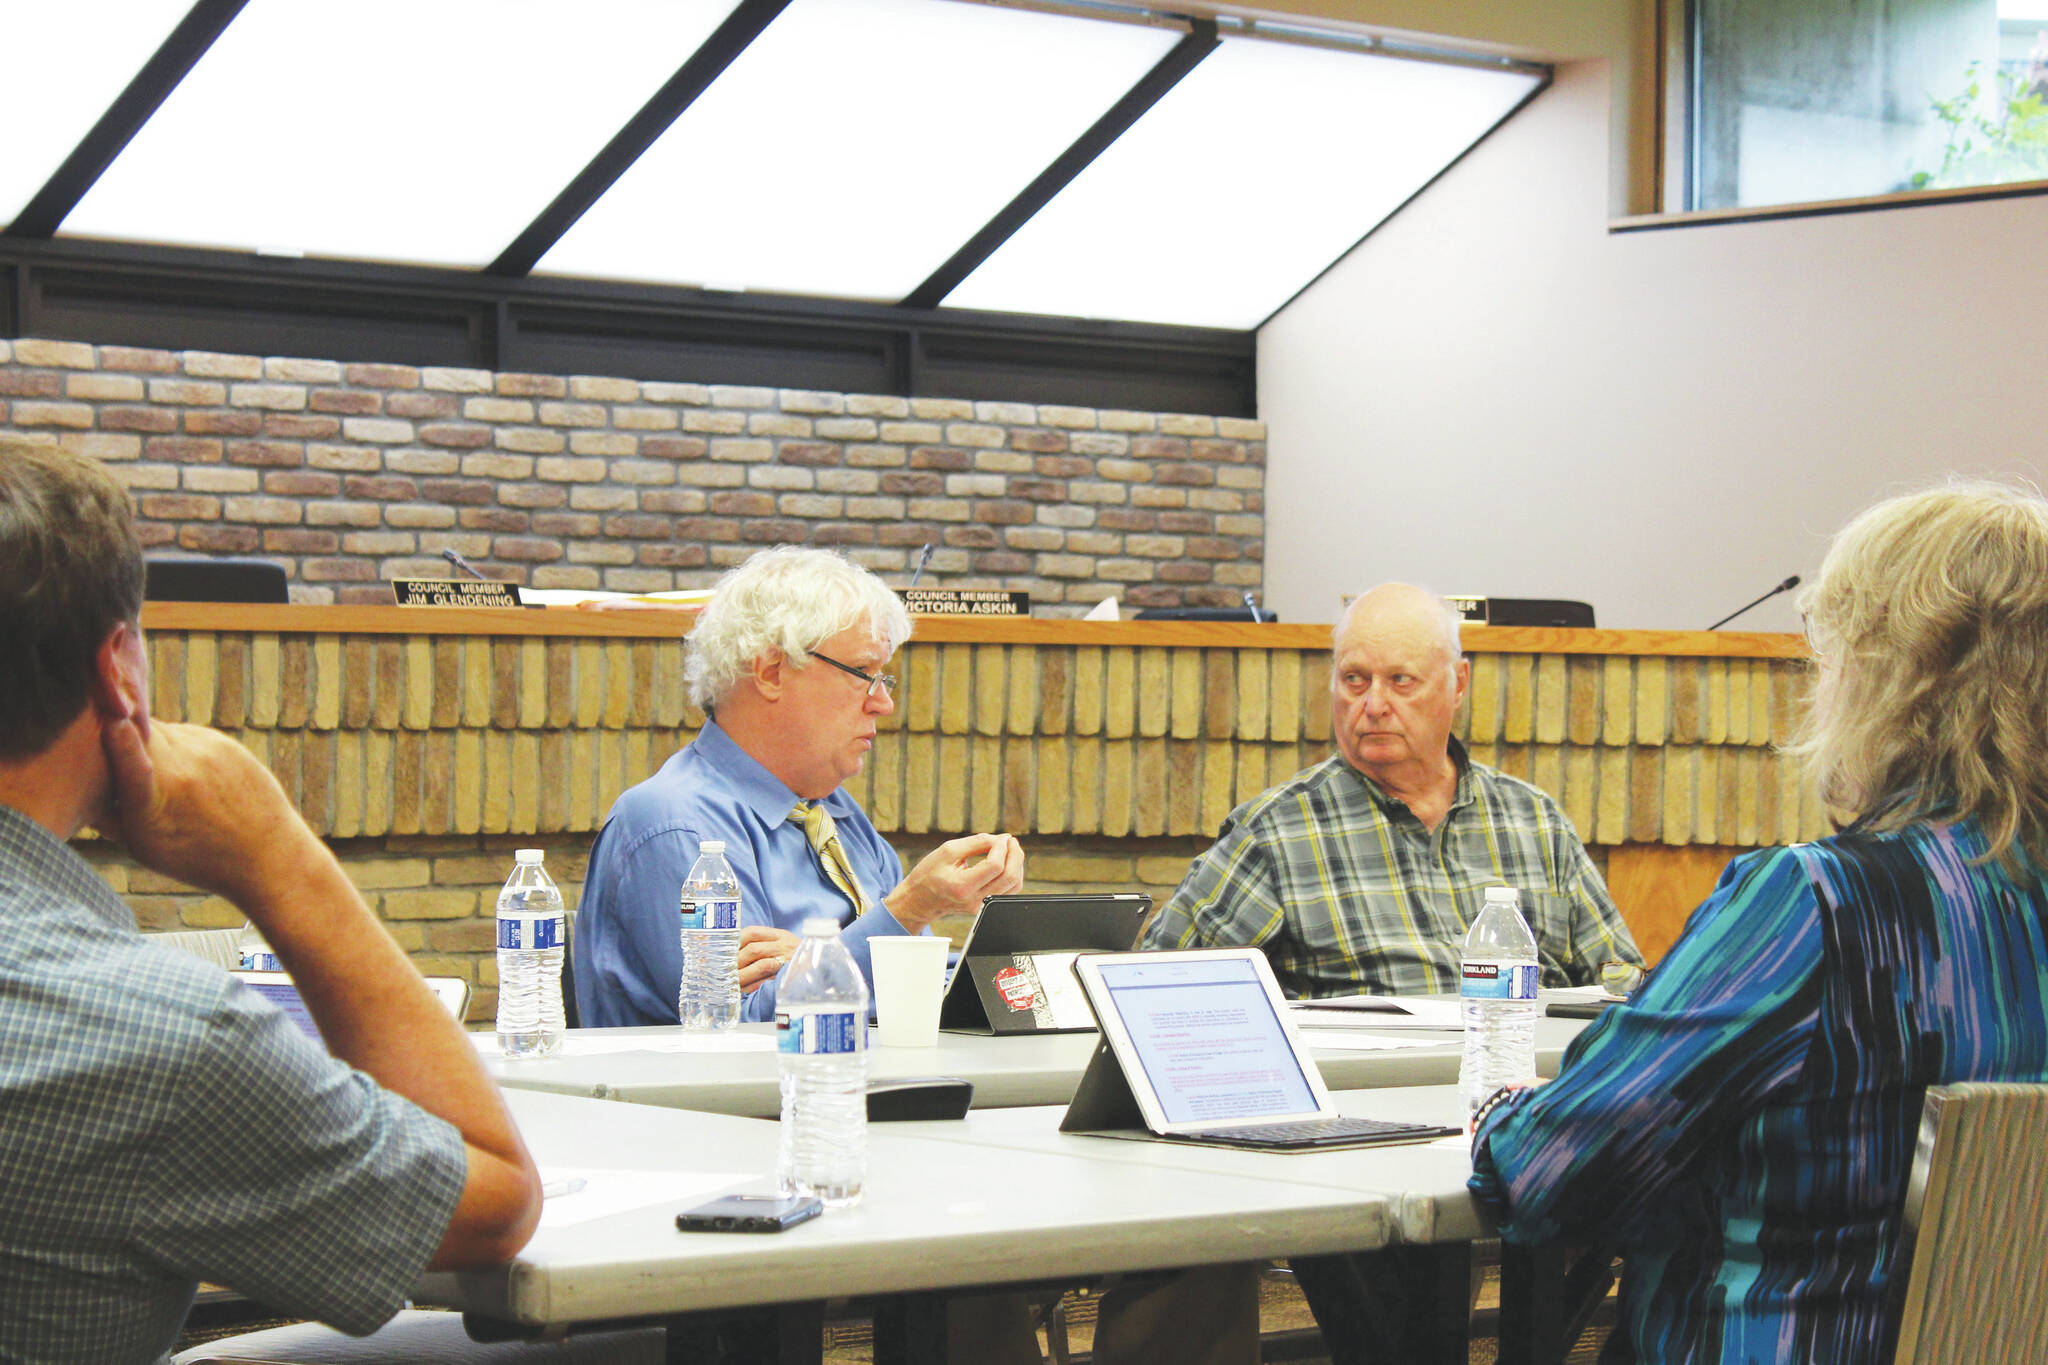 Kenai Vice Mayor and council member Bob Molloy (center), council member Jim Glendening (right), council member Victoria Askin (far right), and council member Henry Knackstedt (far left) participate in a work session discussing the overhaul of Kenai election codes on Wednesday, Sept. 1, 2021 in Kenai, Alaska.